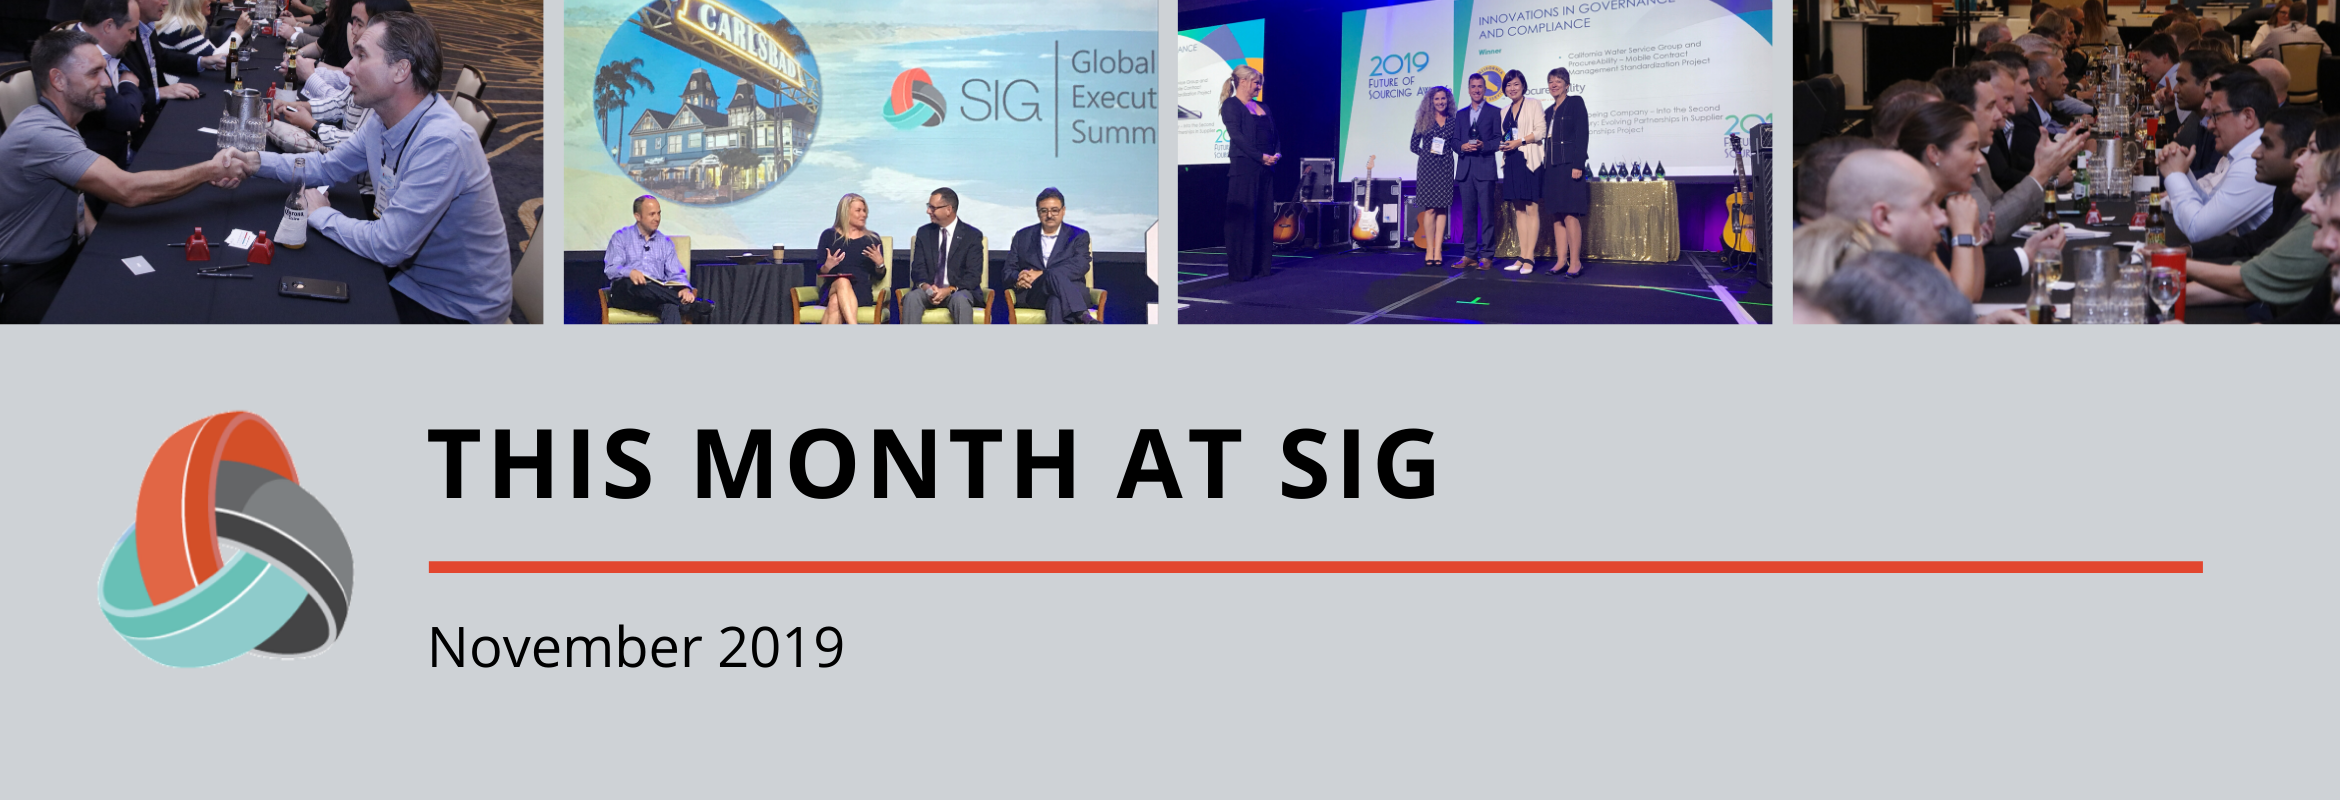 A roundup of SIG content in November.